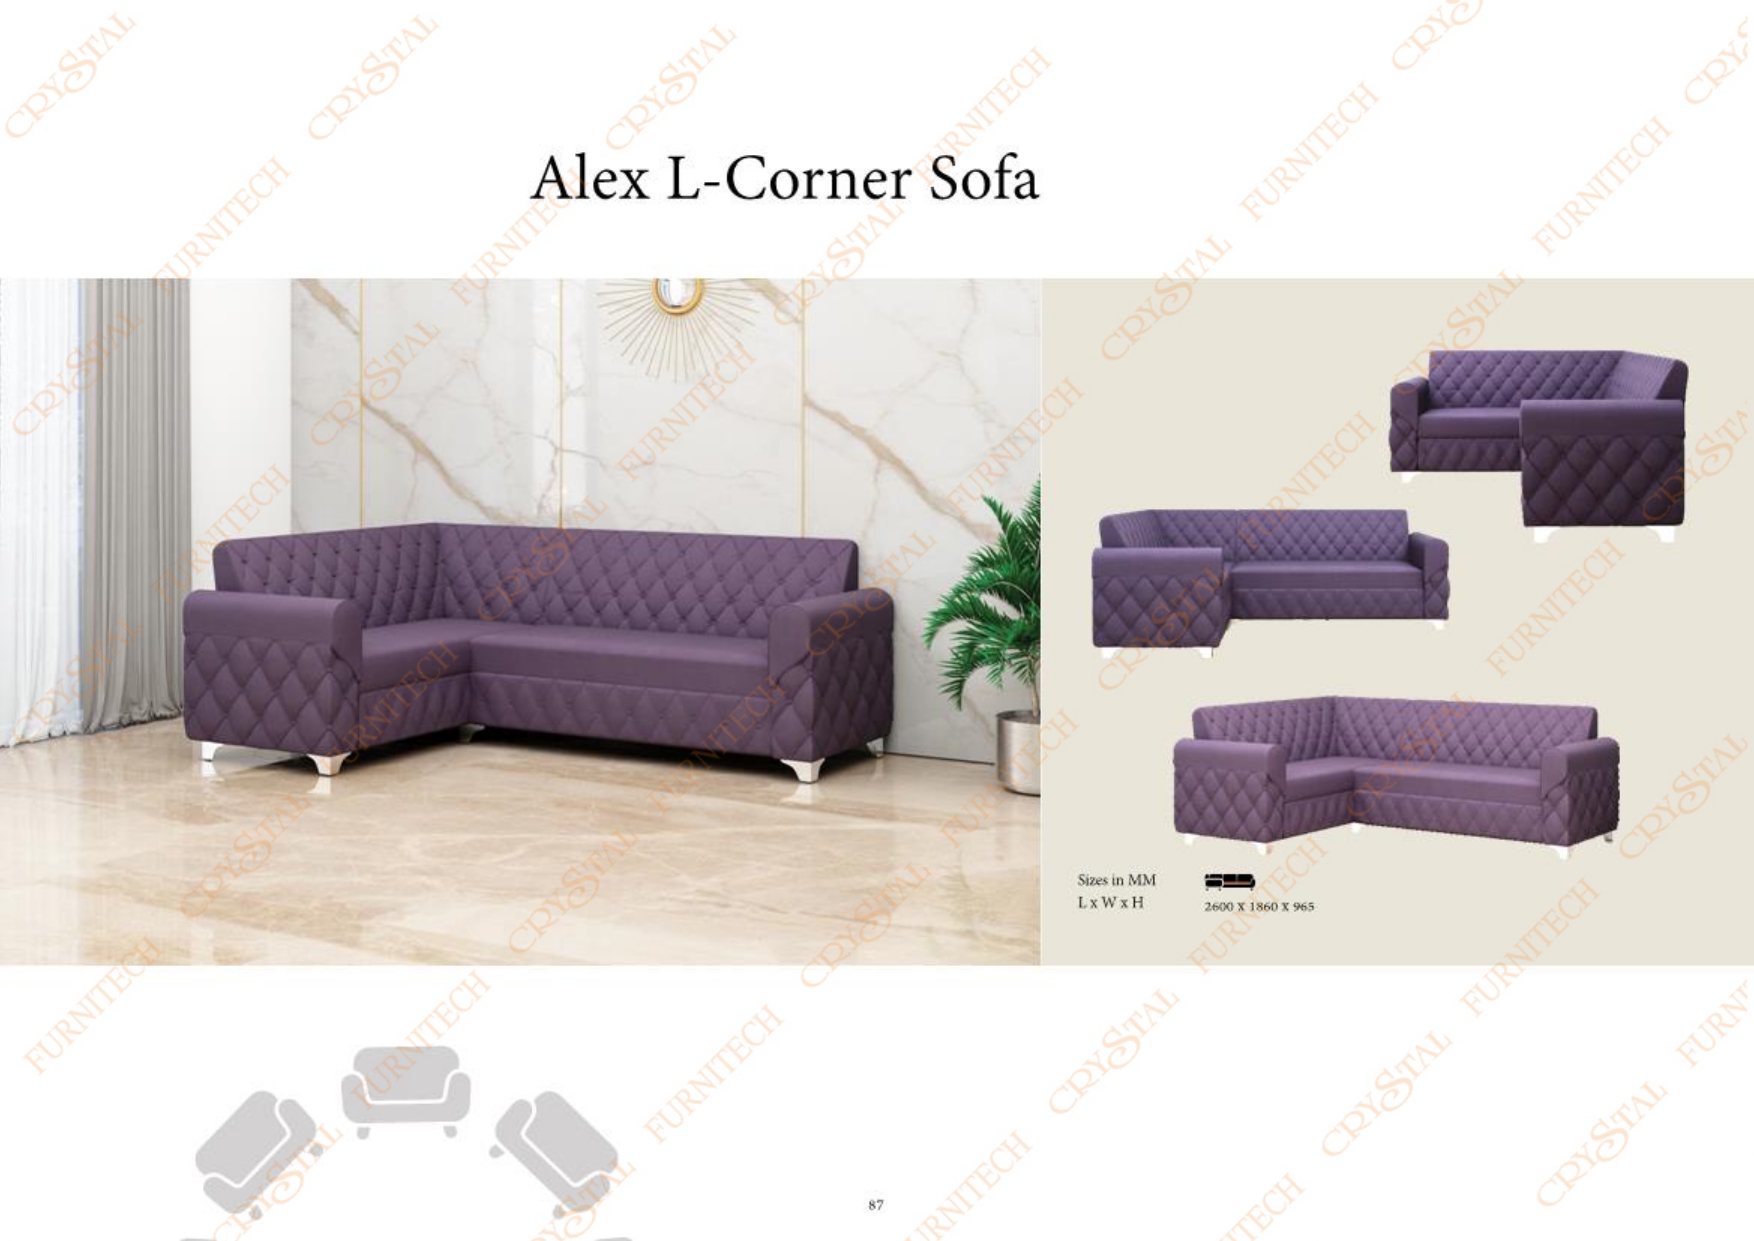 Designer Sofa Set For Perfect Looks to Your Interiors